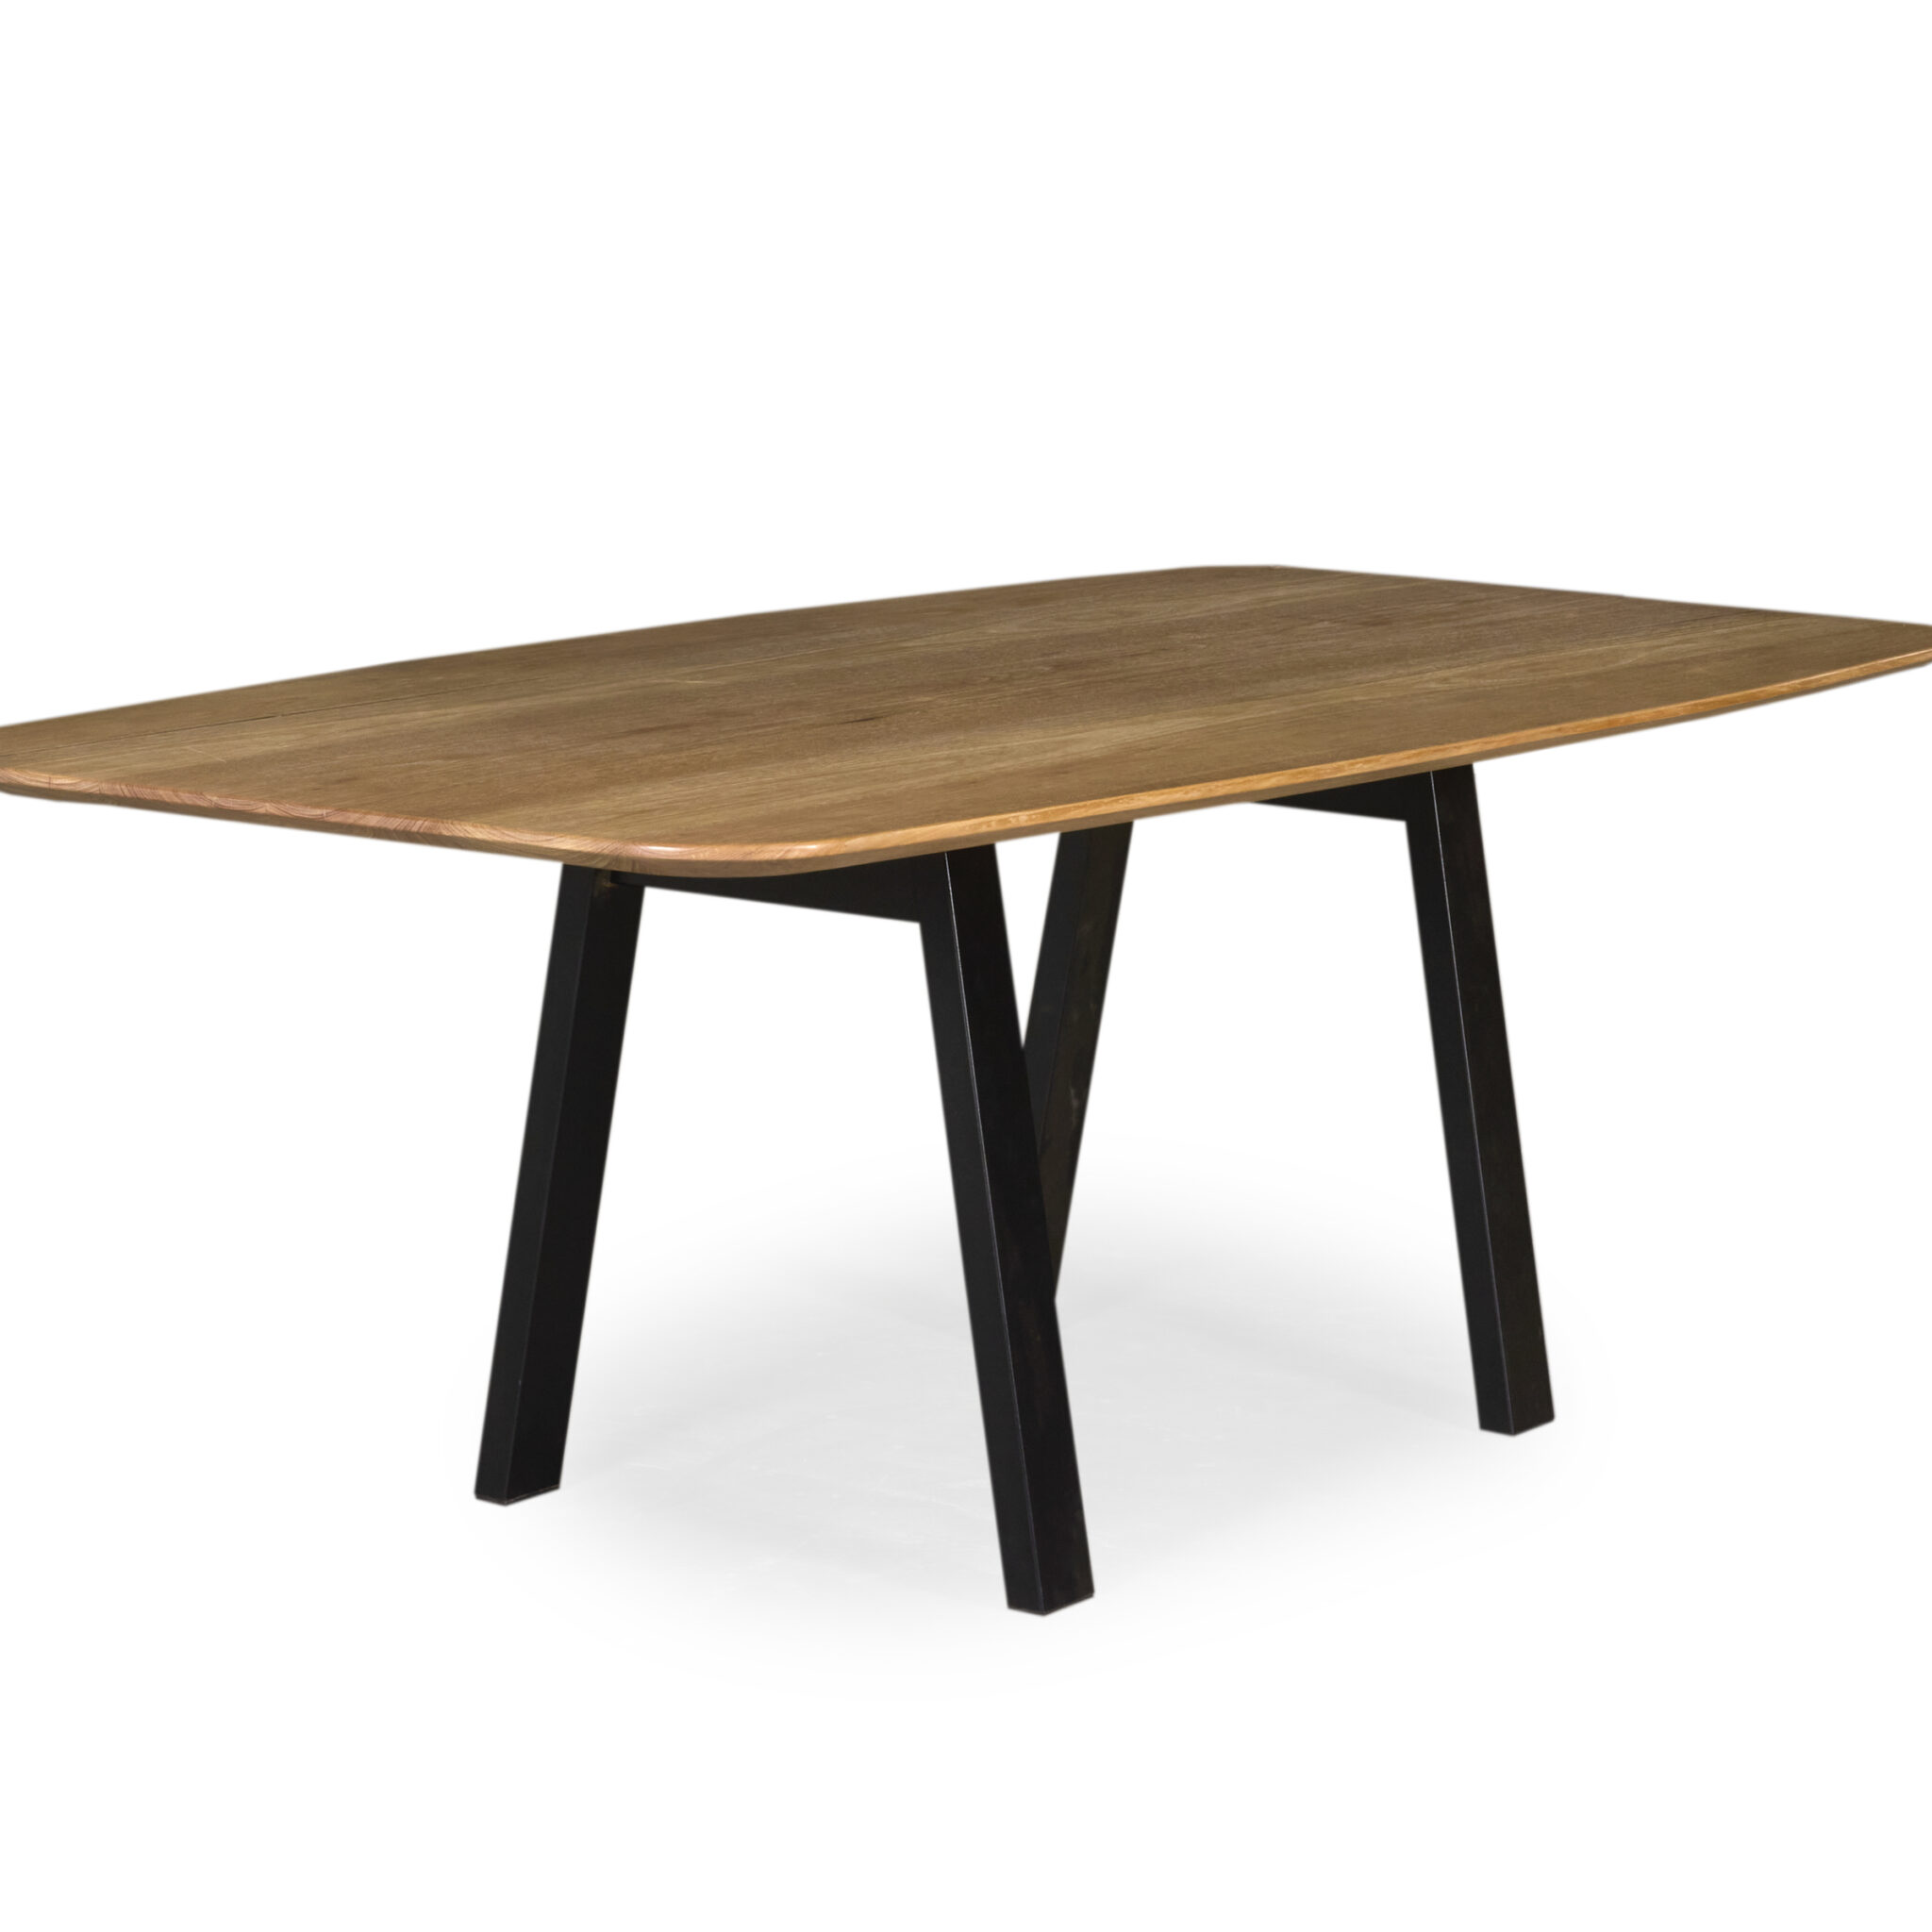 Balwyn Dining Table: Crafted from Victorian Ash timber with Kooyong Black Steel base.